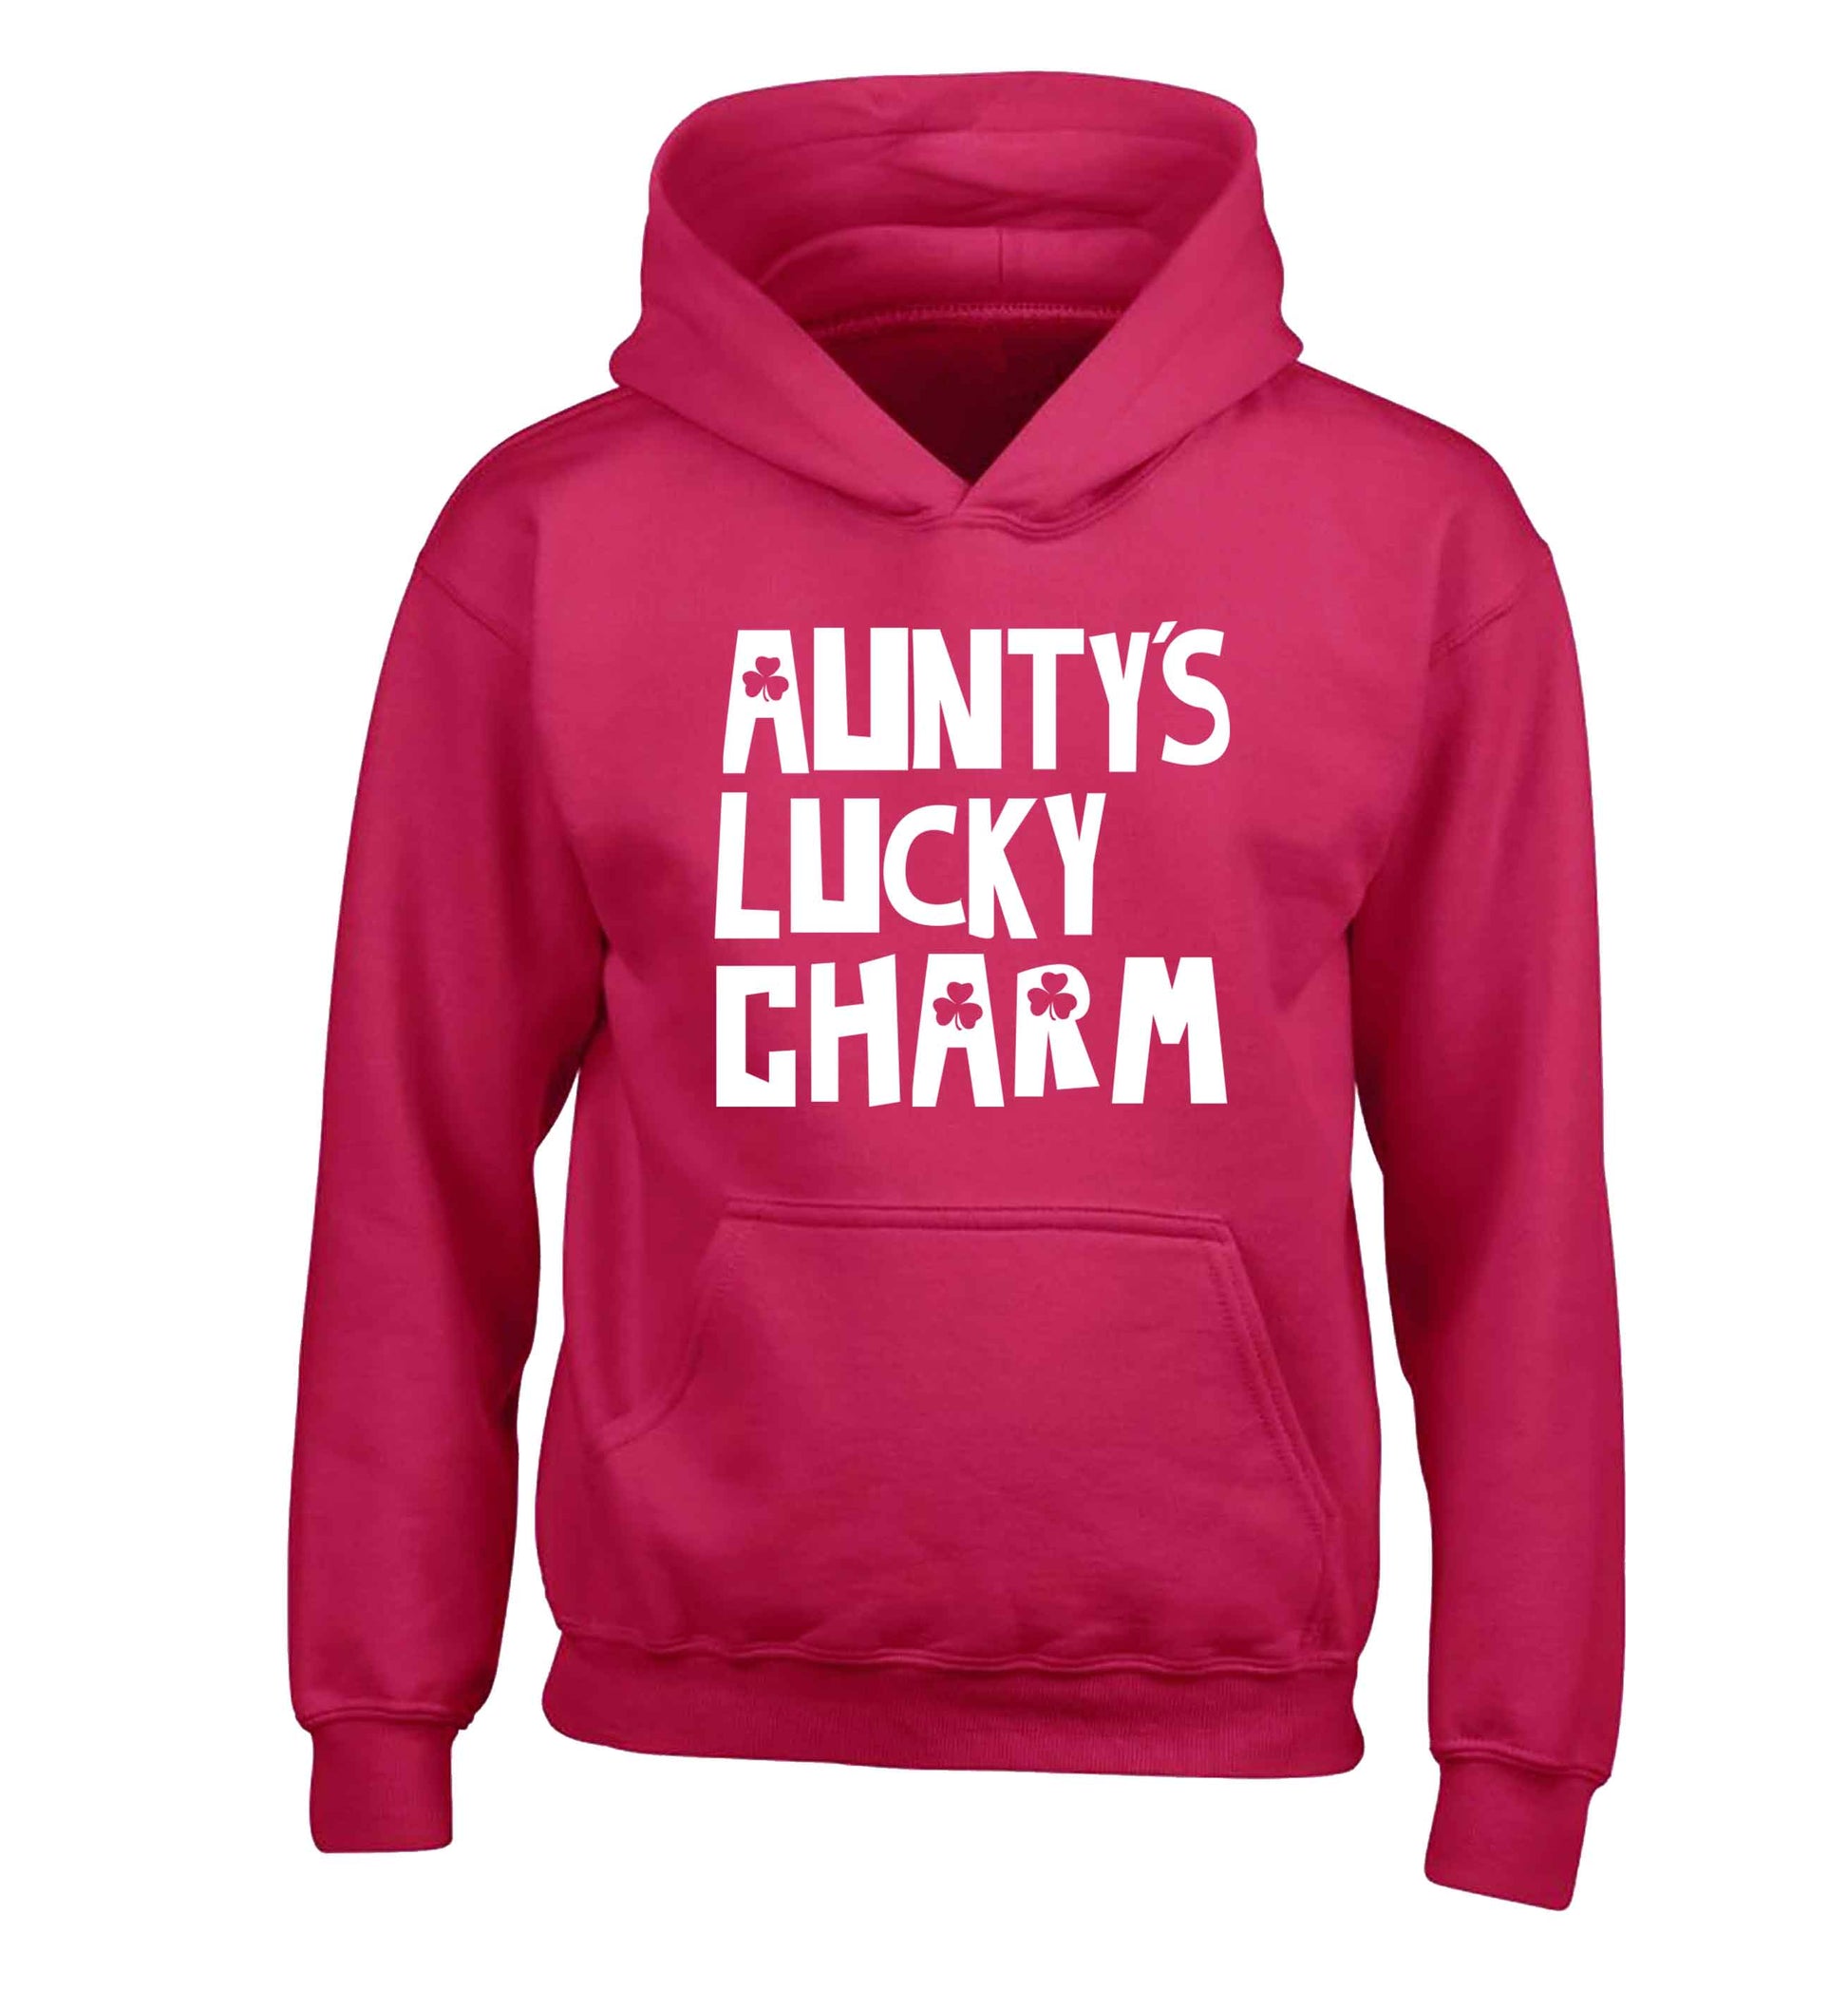 Aunty's lucky charm children's pink hoodie 12-13 Years